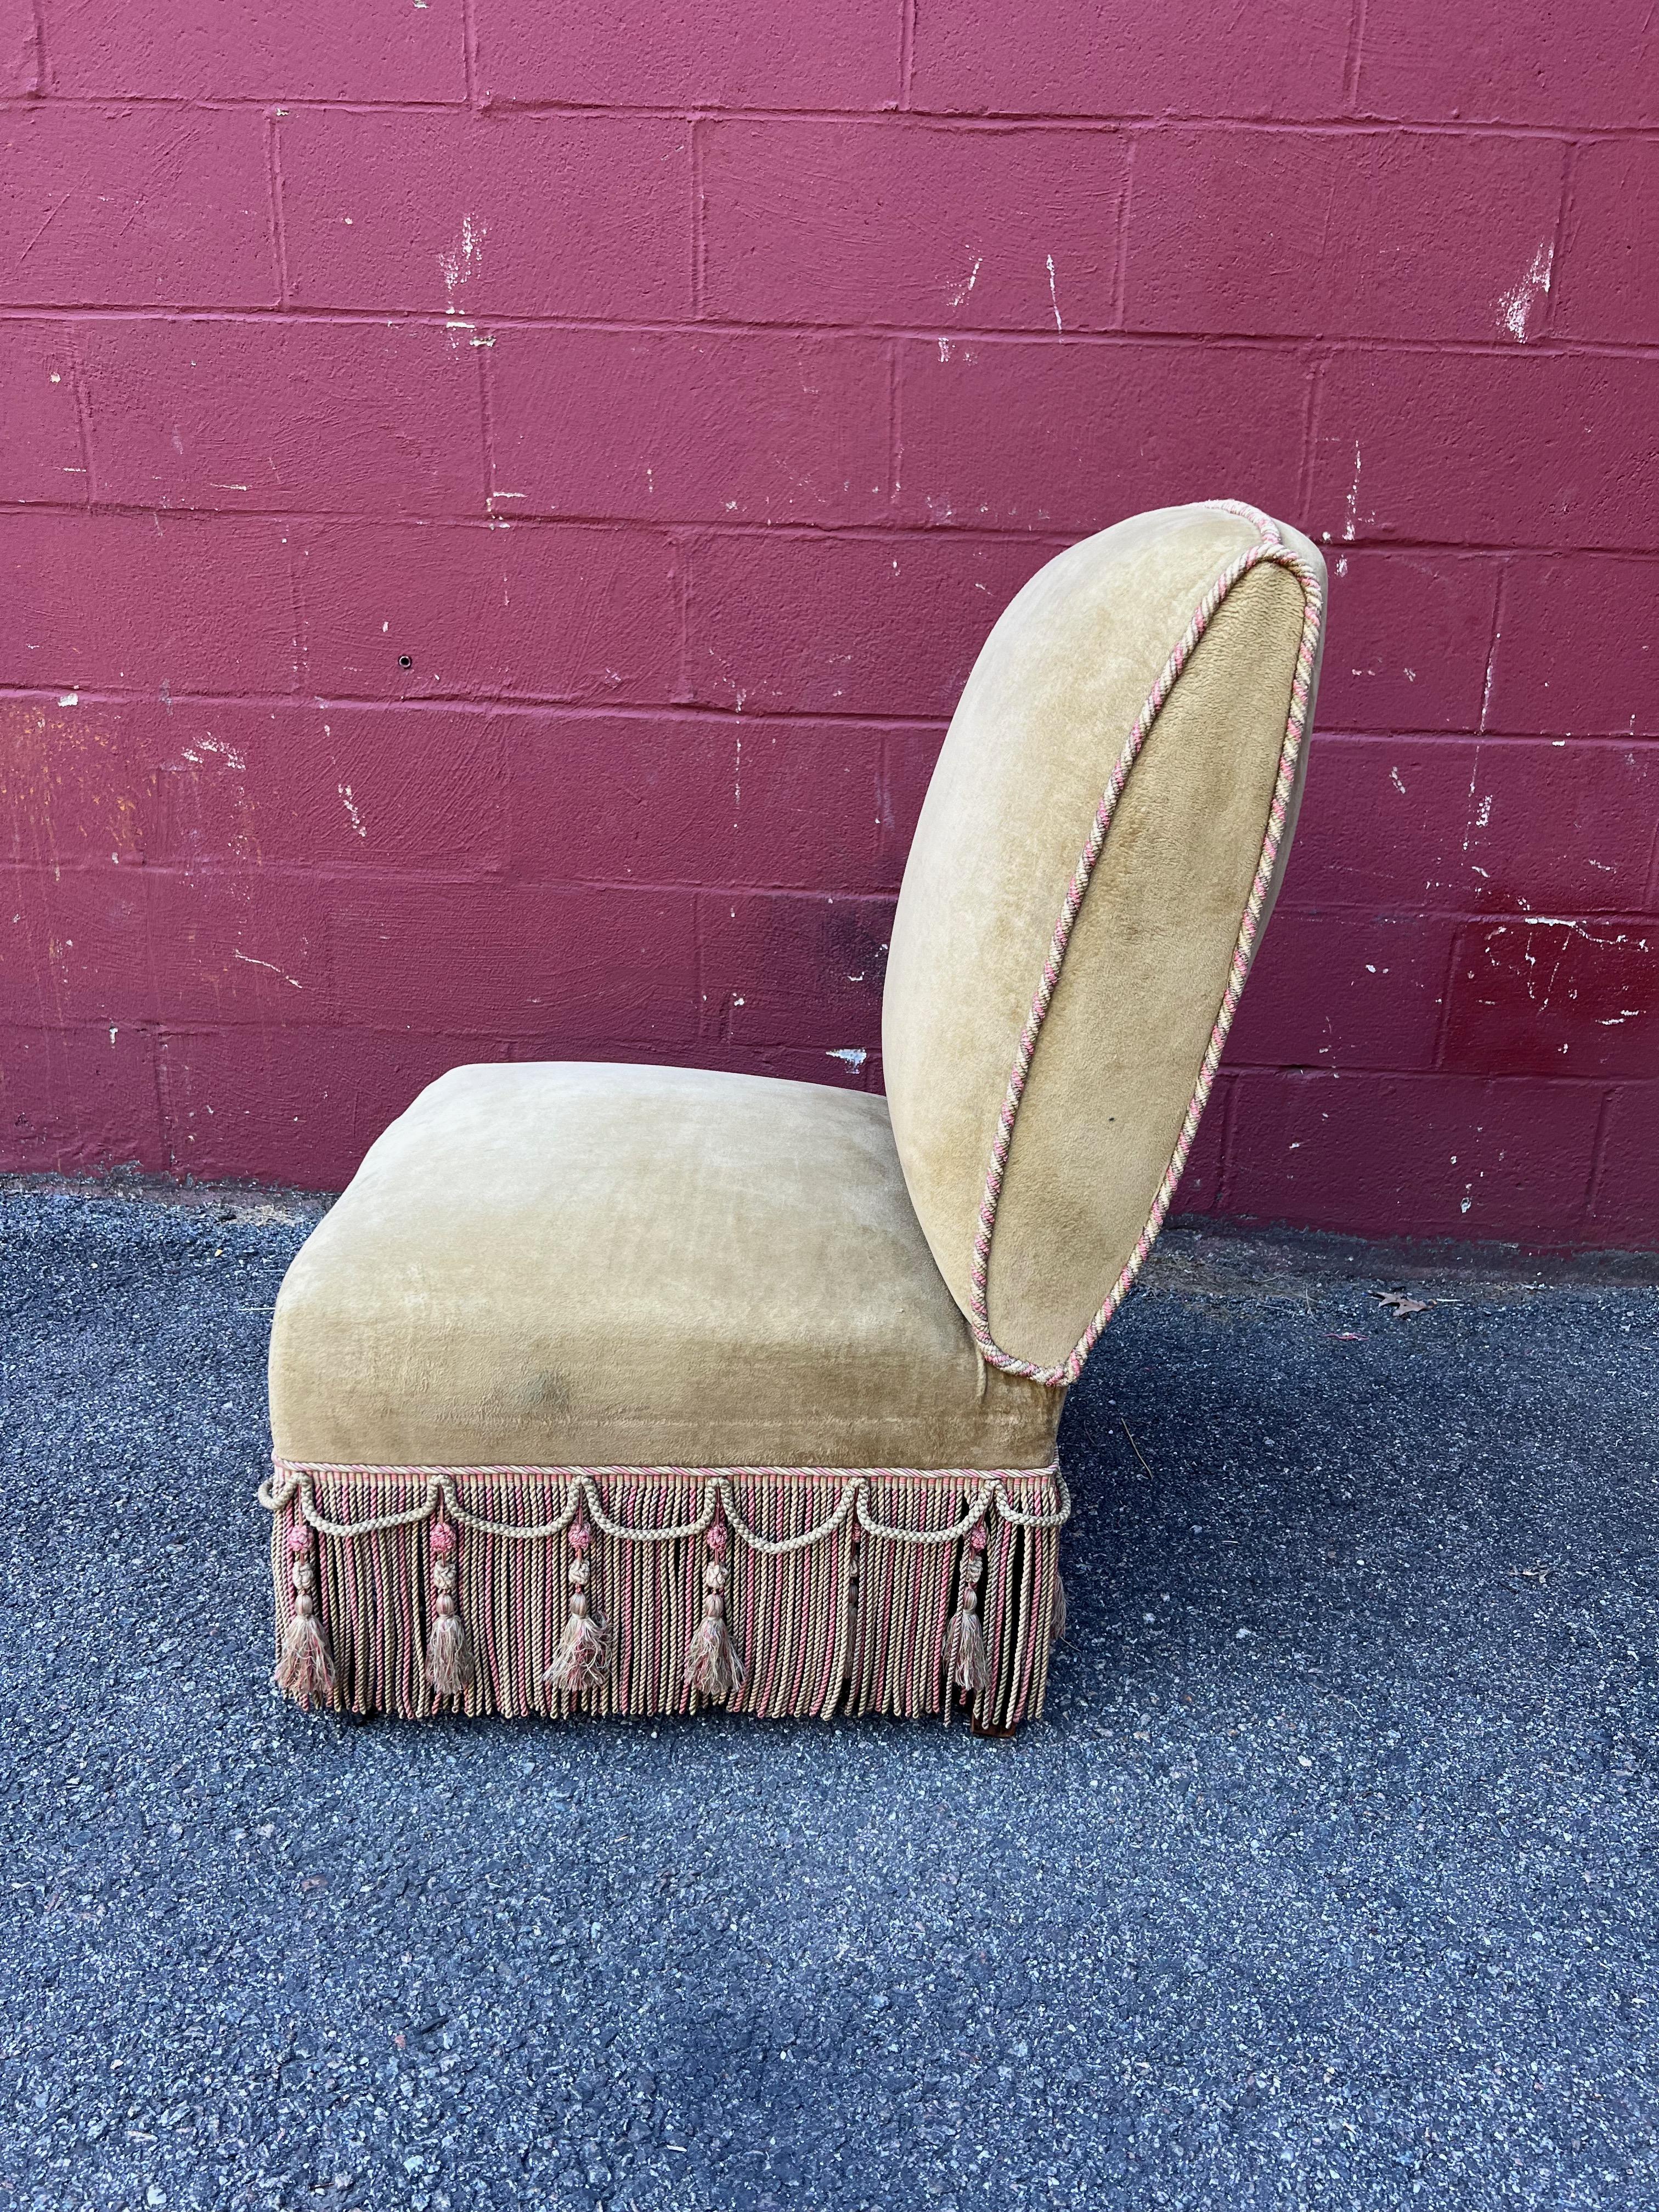 Early 20th Century French Napoleon III Style Slipper Chair For Sale